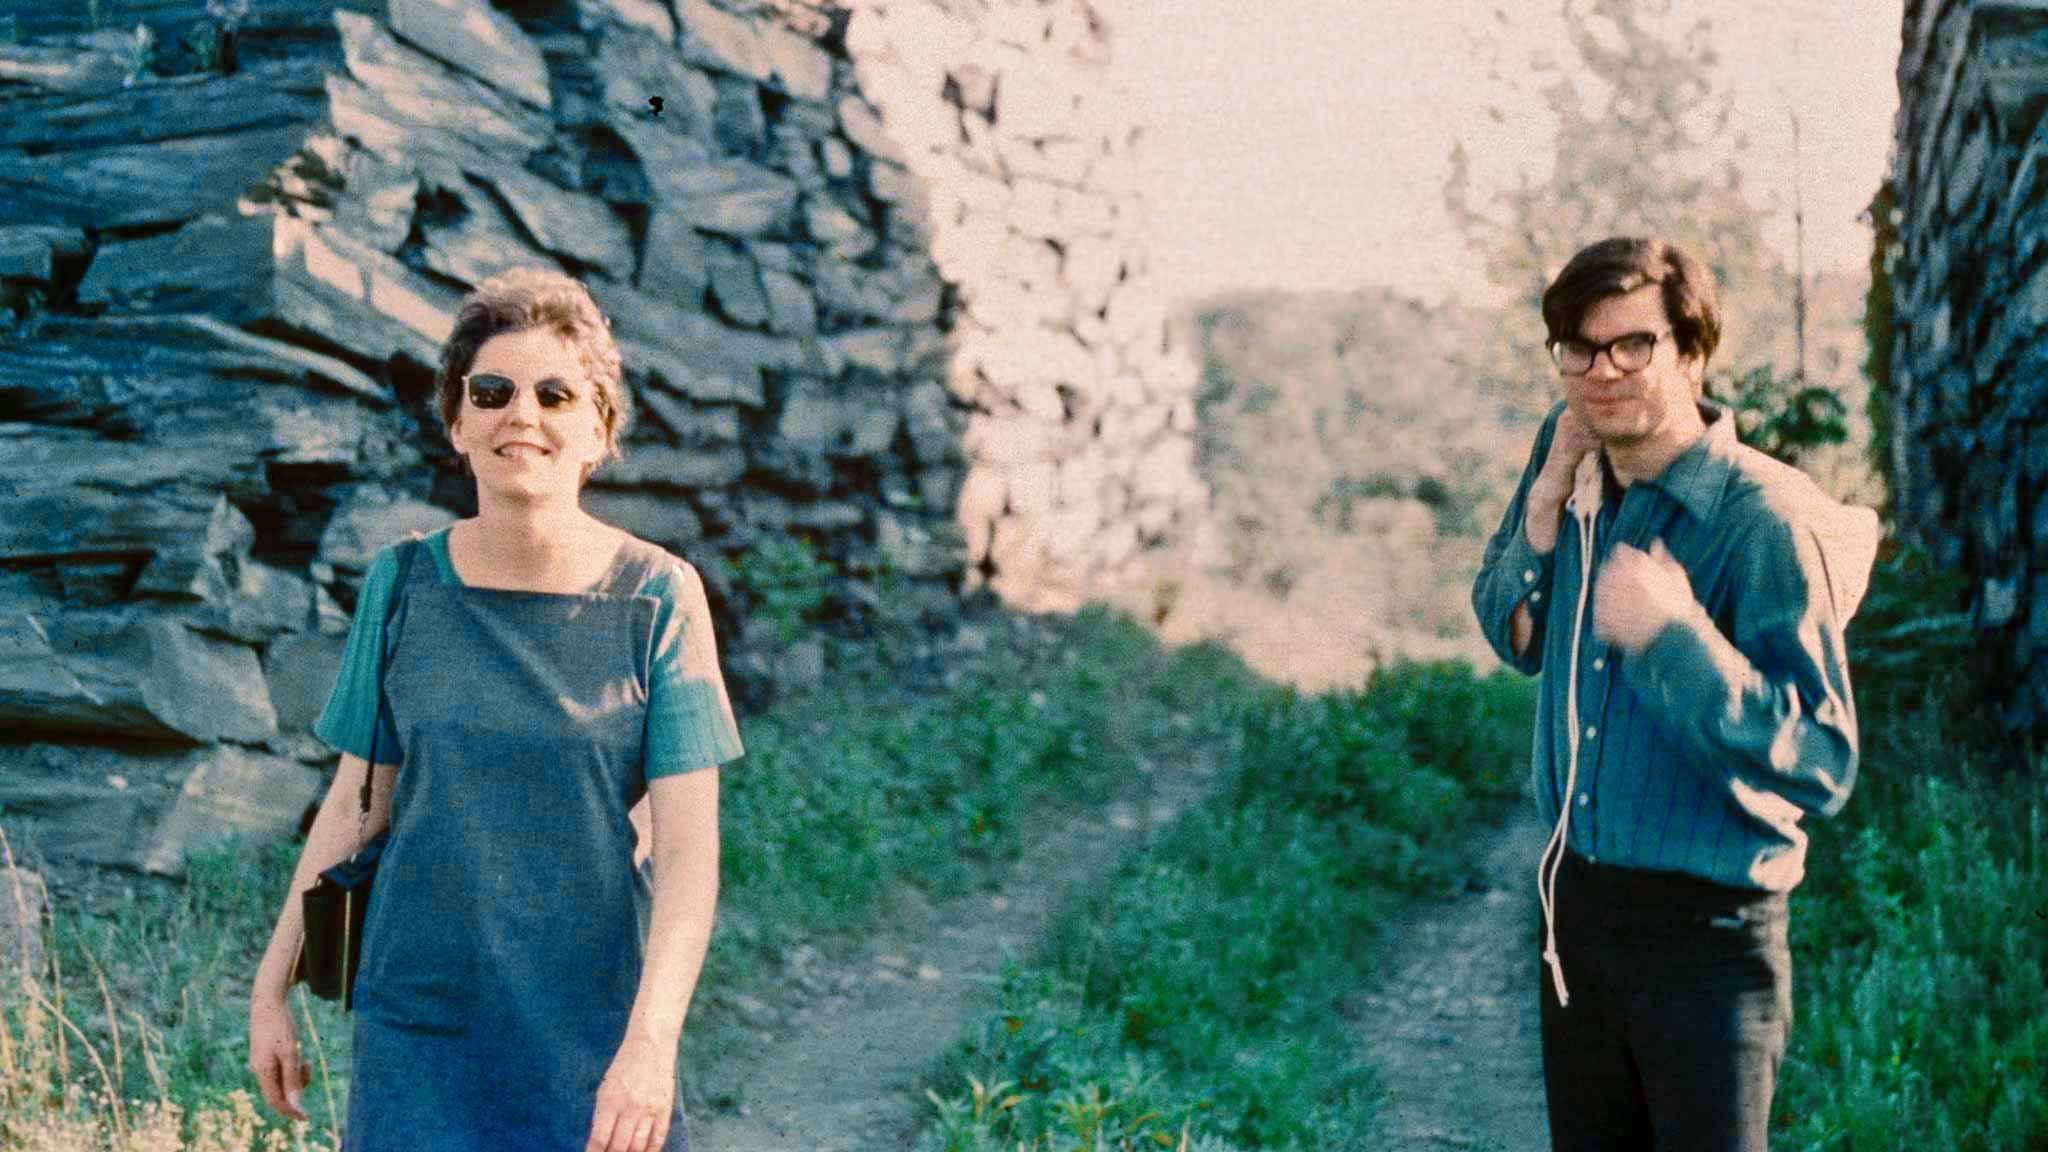 Nancy and Bob at a New Jersey quarry